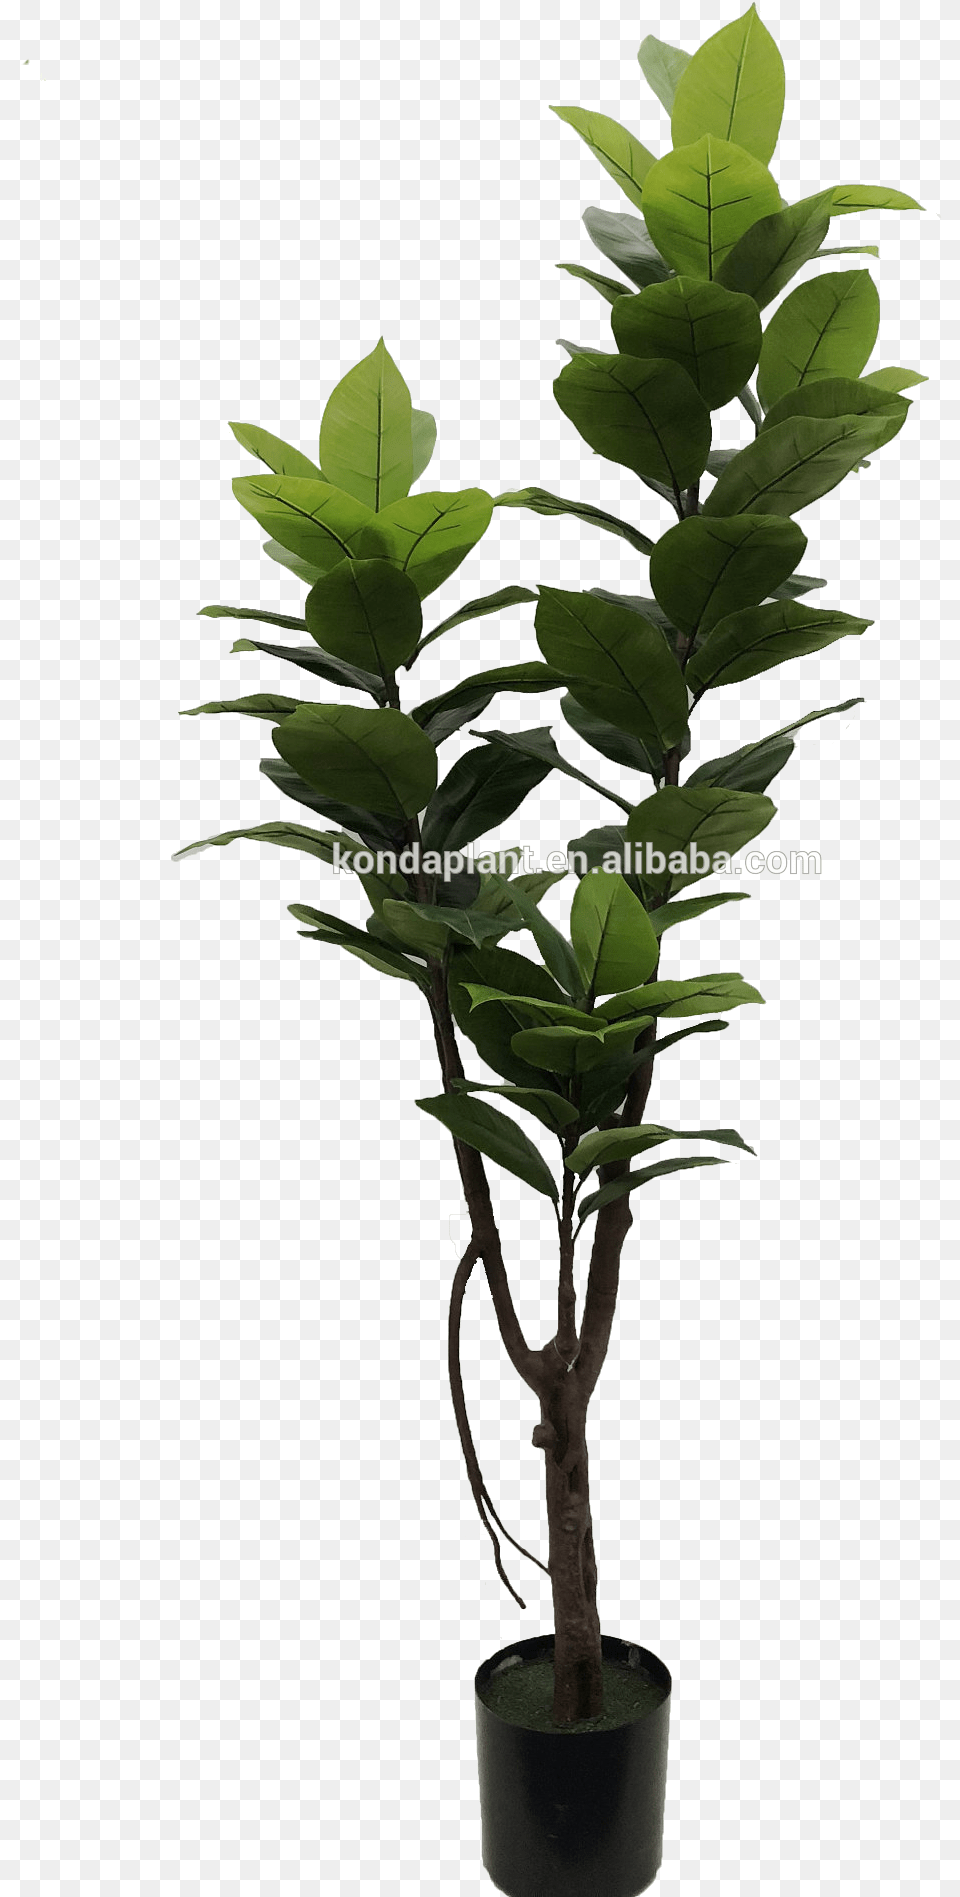 Flowerpot, Leaf, Plant, Potted Plant, Tree Png Image